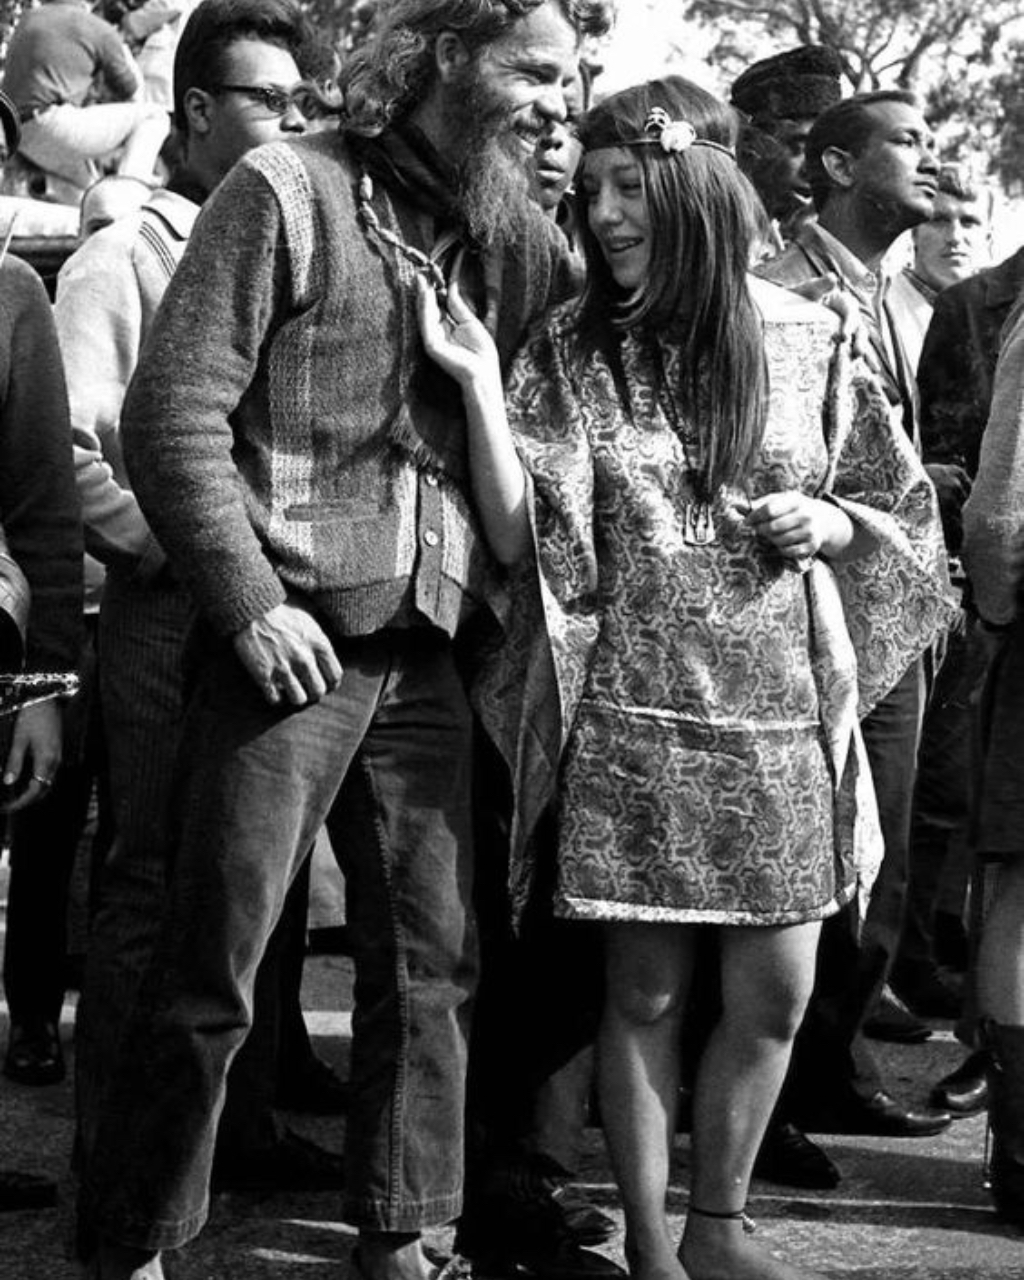 Couple at Woodstock